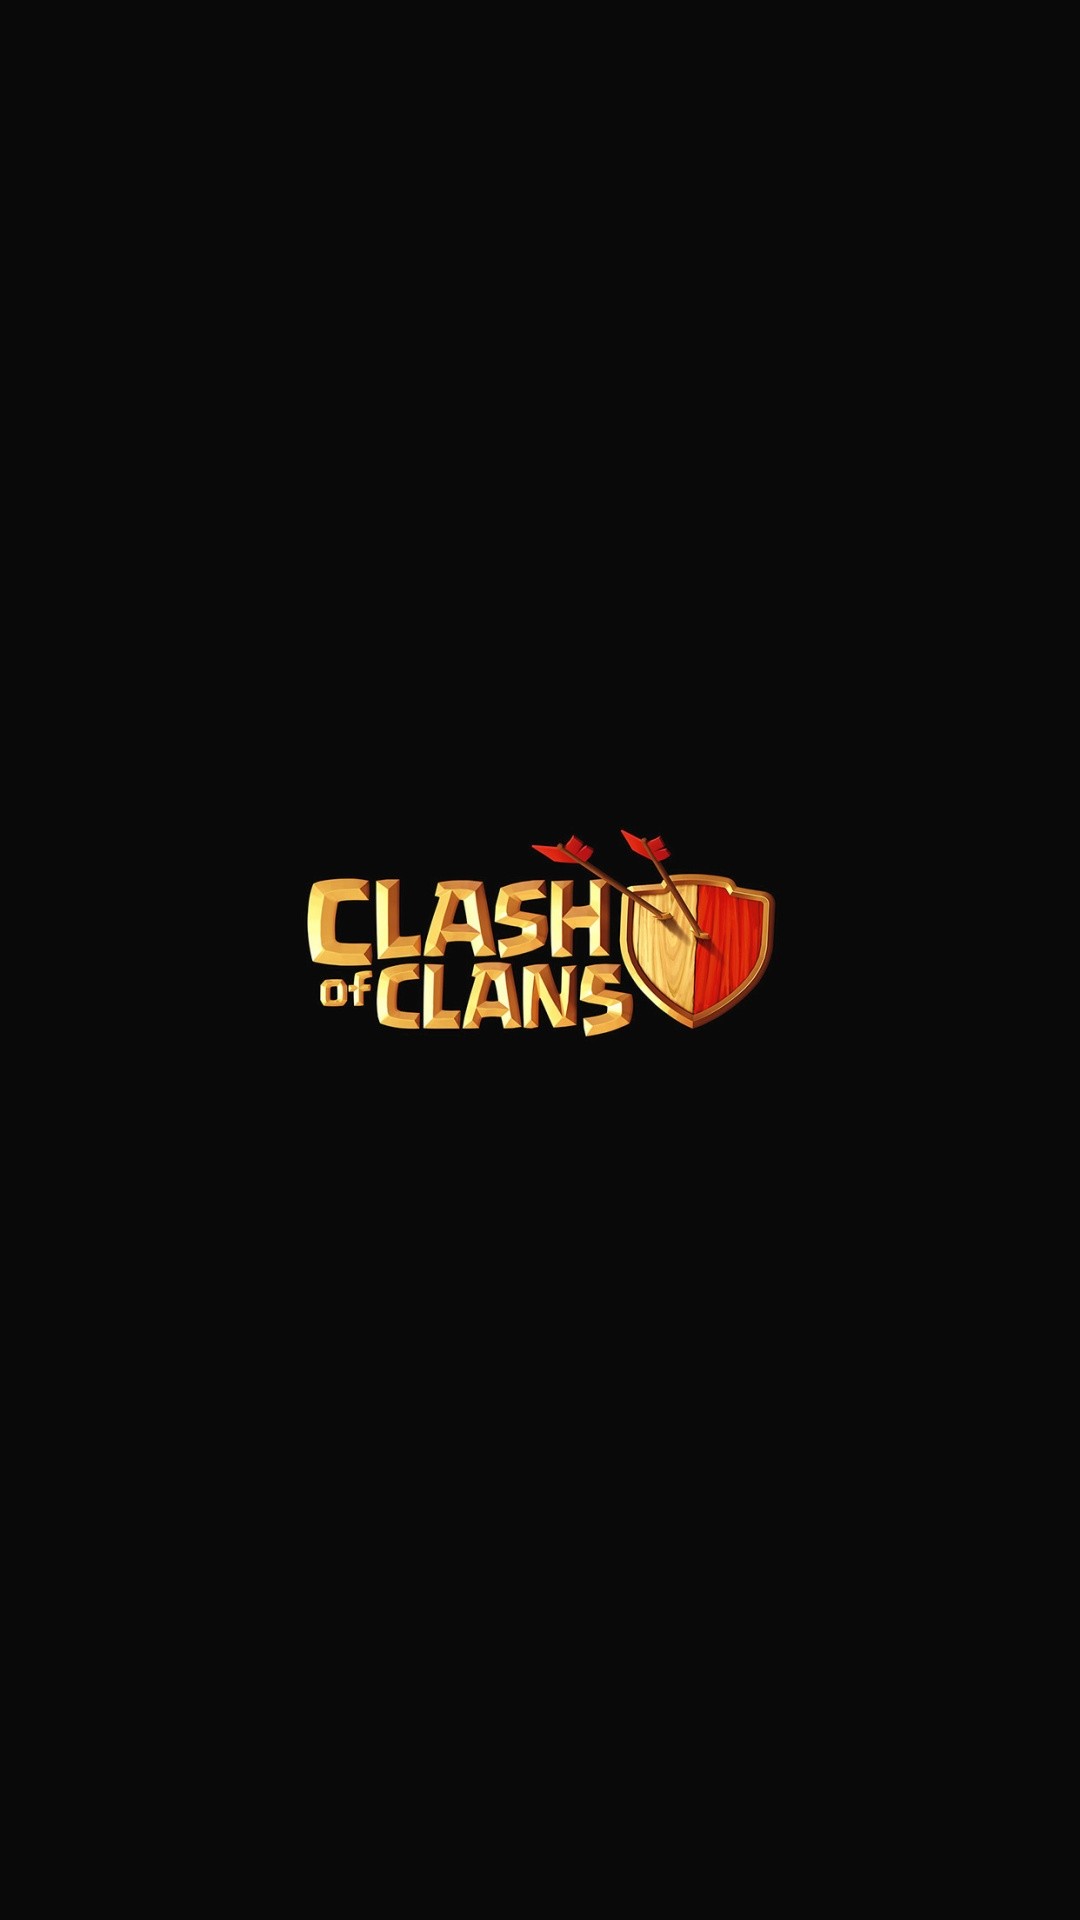 1080x1920 Clash Of Clans Game iPhone 6+ HD Wallpaper - http://freebestpicture.